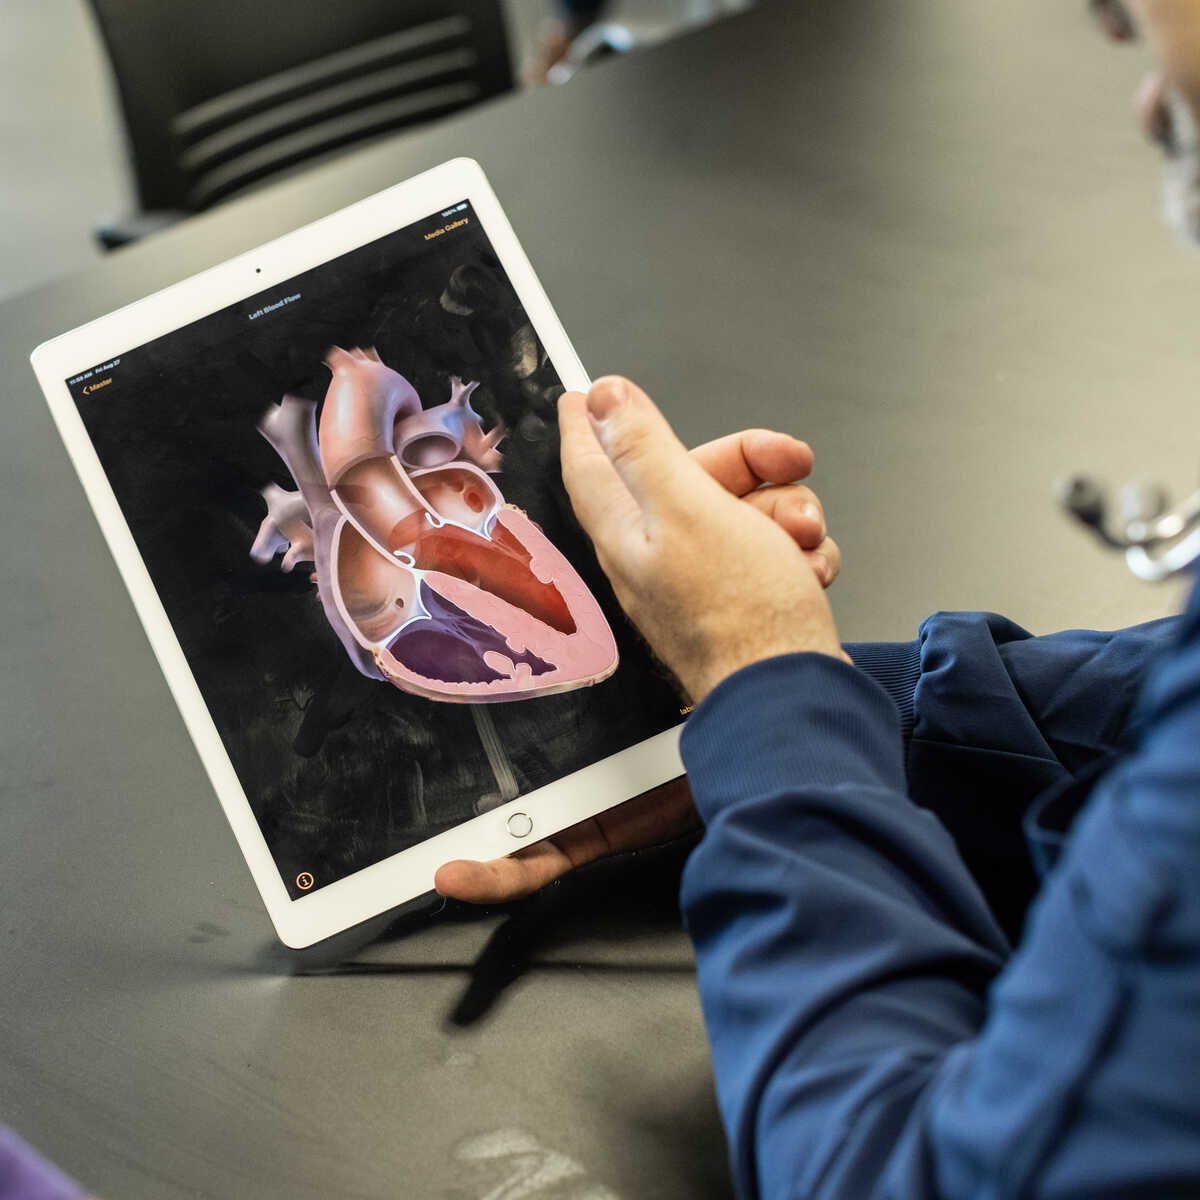 Faculty member and student working with an iPad showing a heart